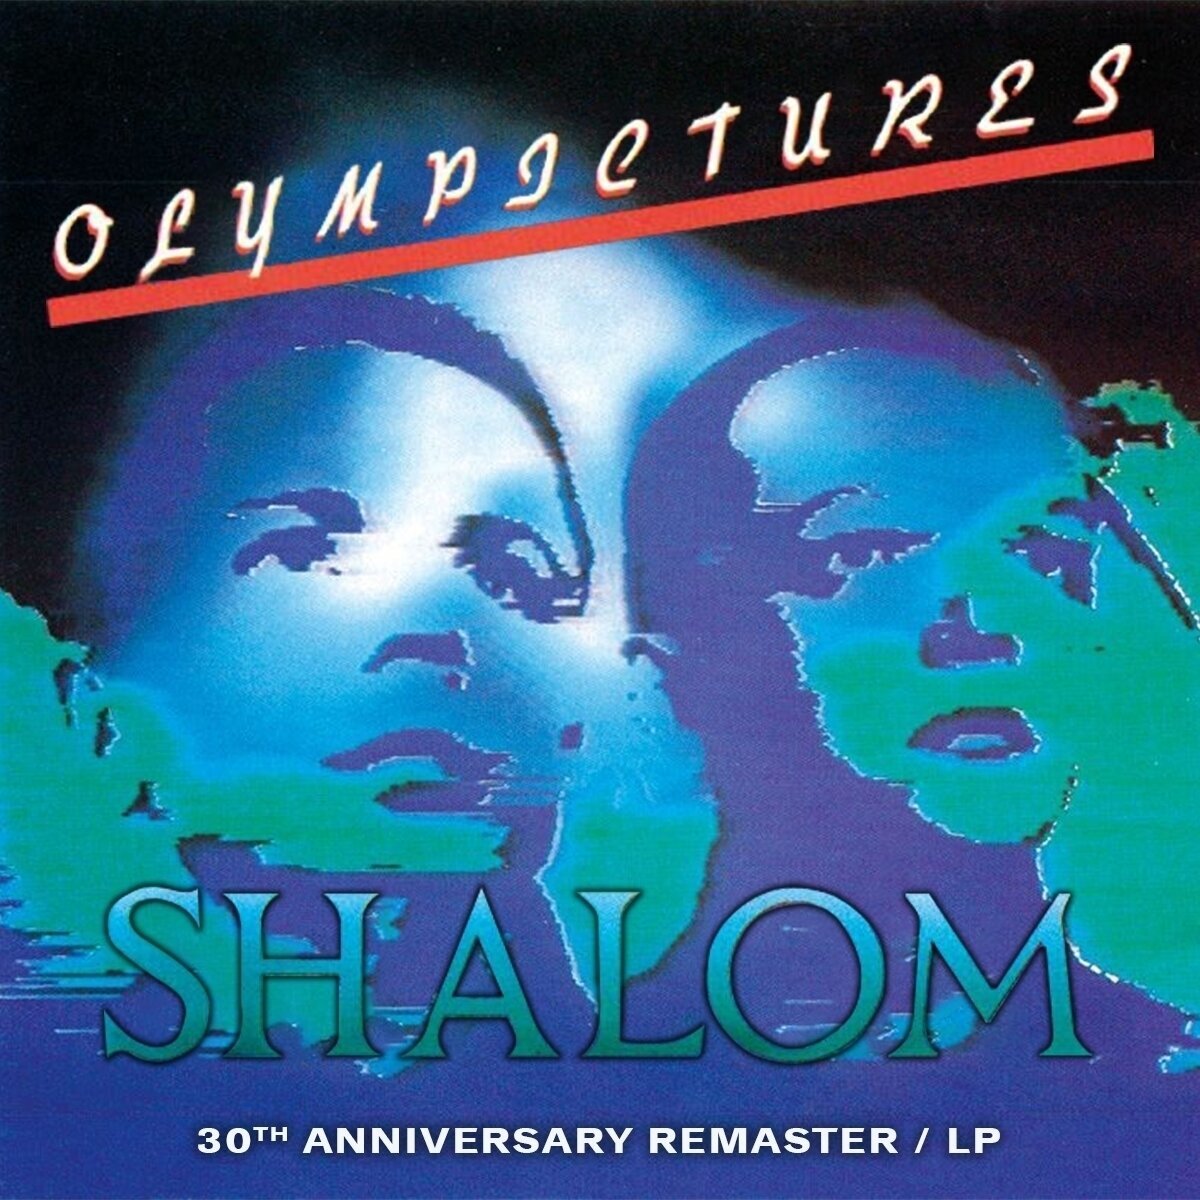 Shalom - Olympictures (30th Anniversary) (Remastered) (LP) Shalom